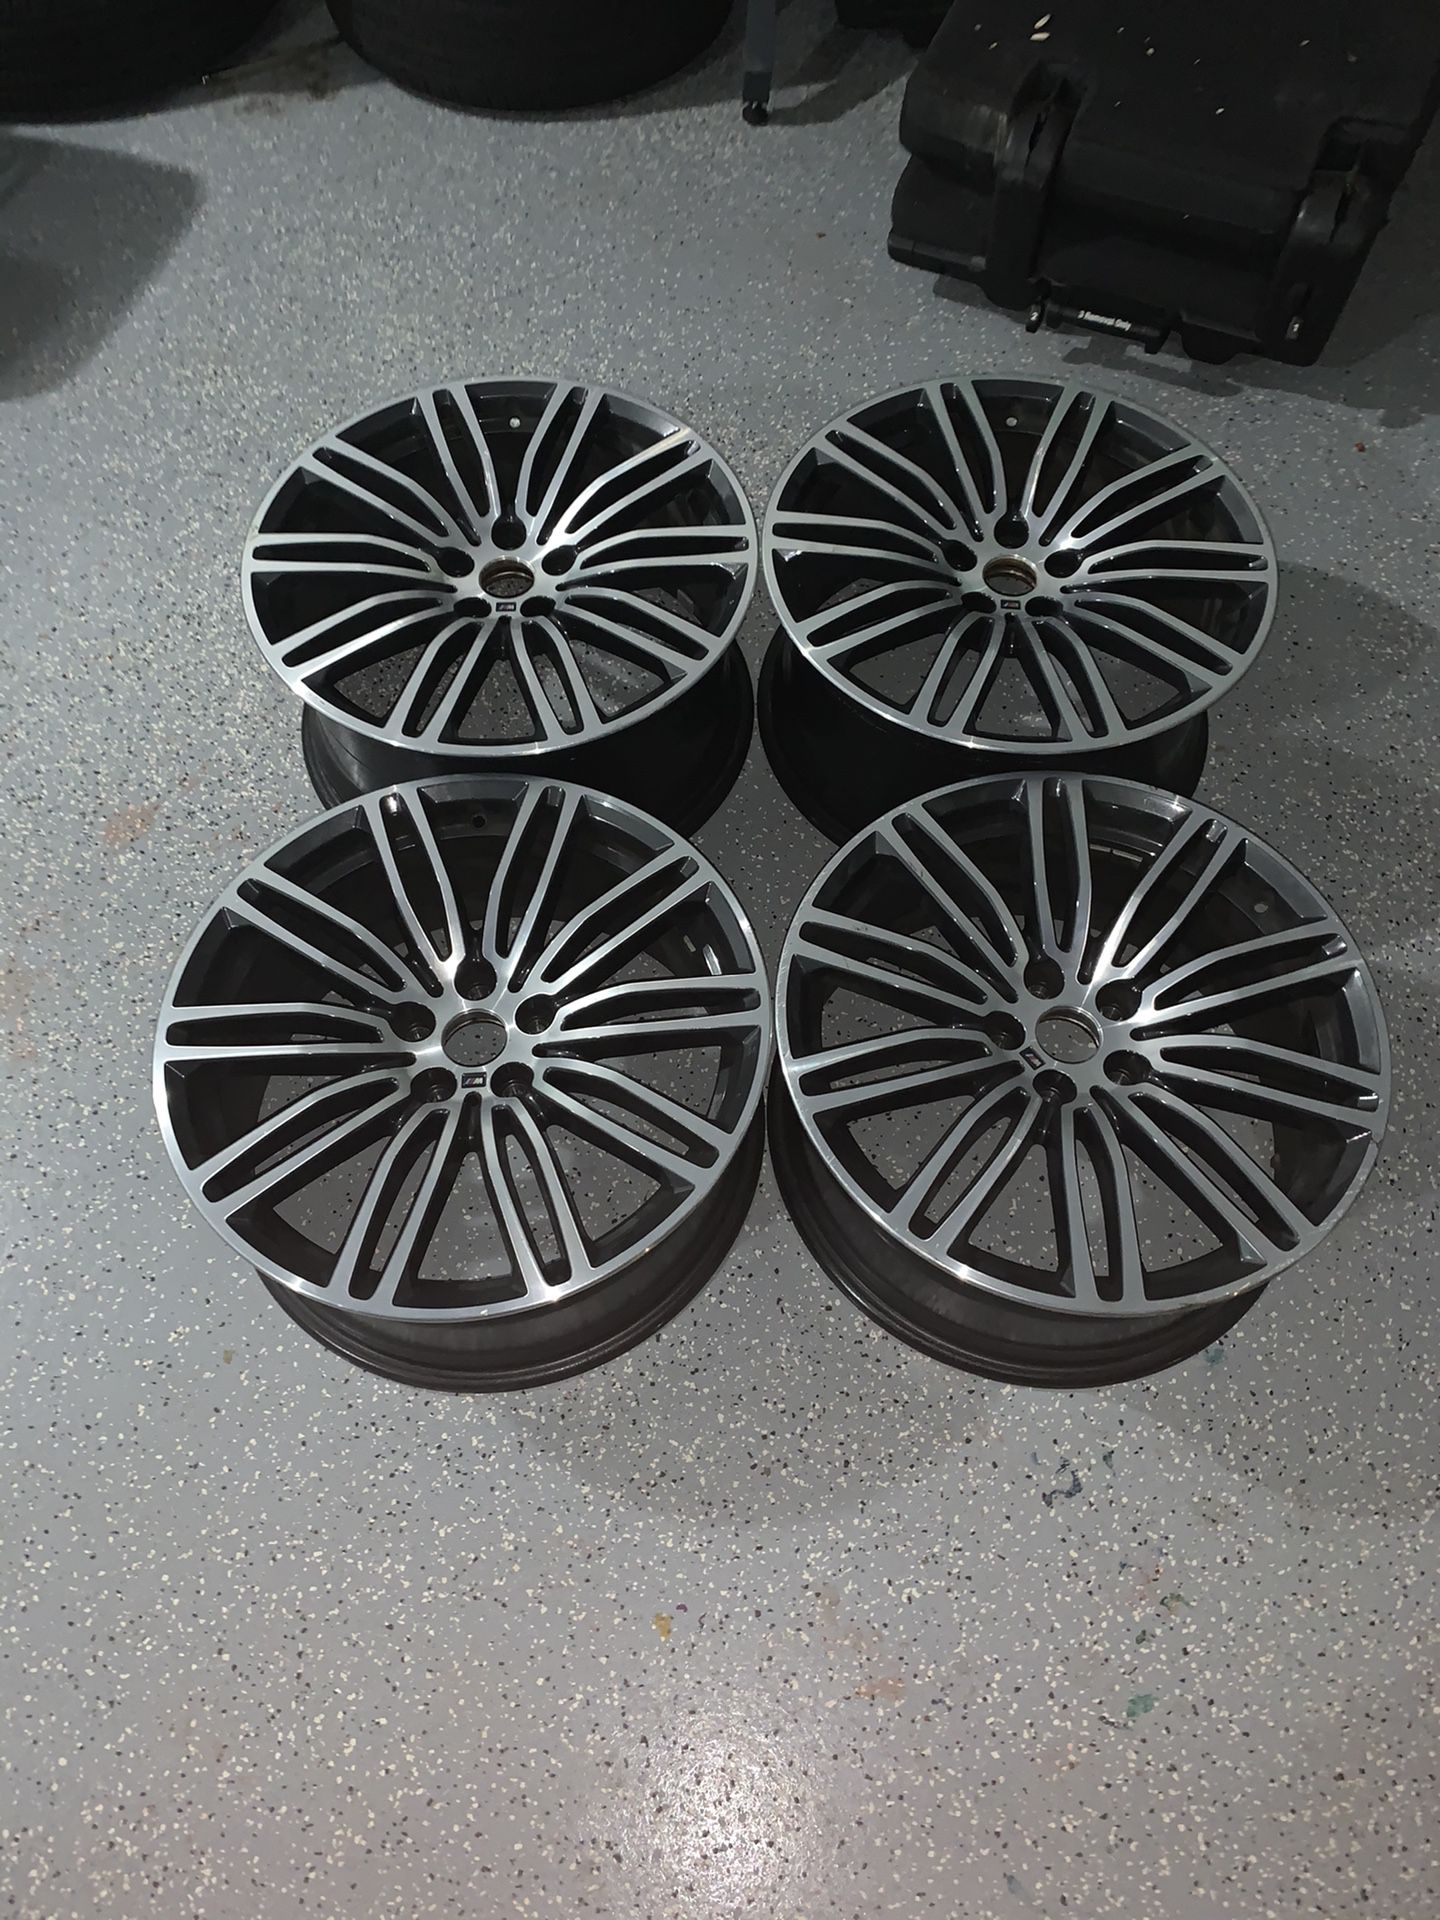 1. 2017-2019 BMW 5 Series, 2 of the rims are 9j 19 and the other two 8j 19. Read des